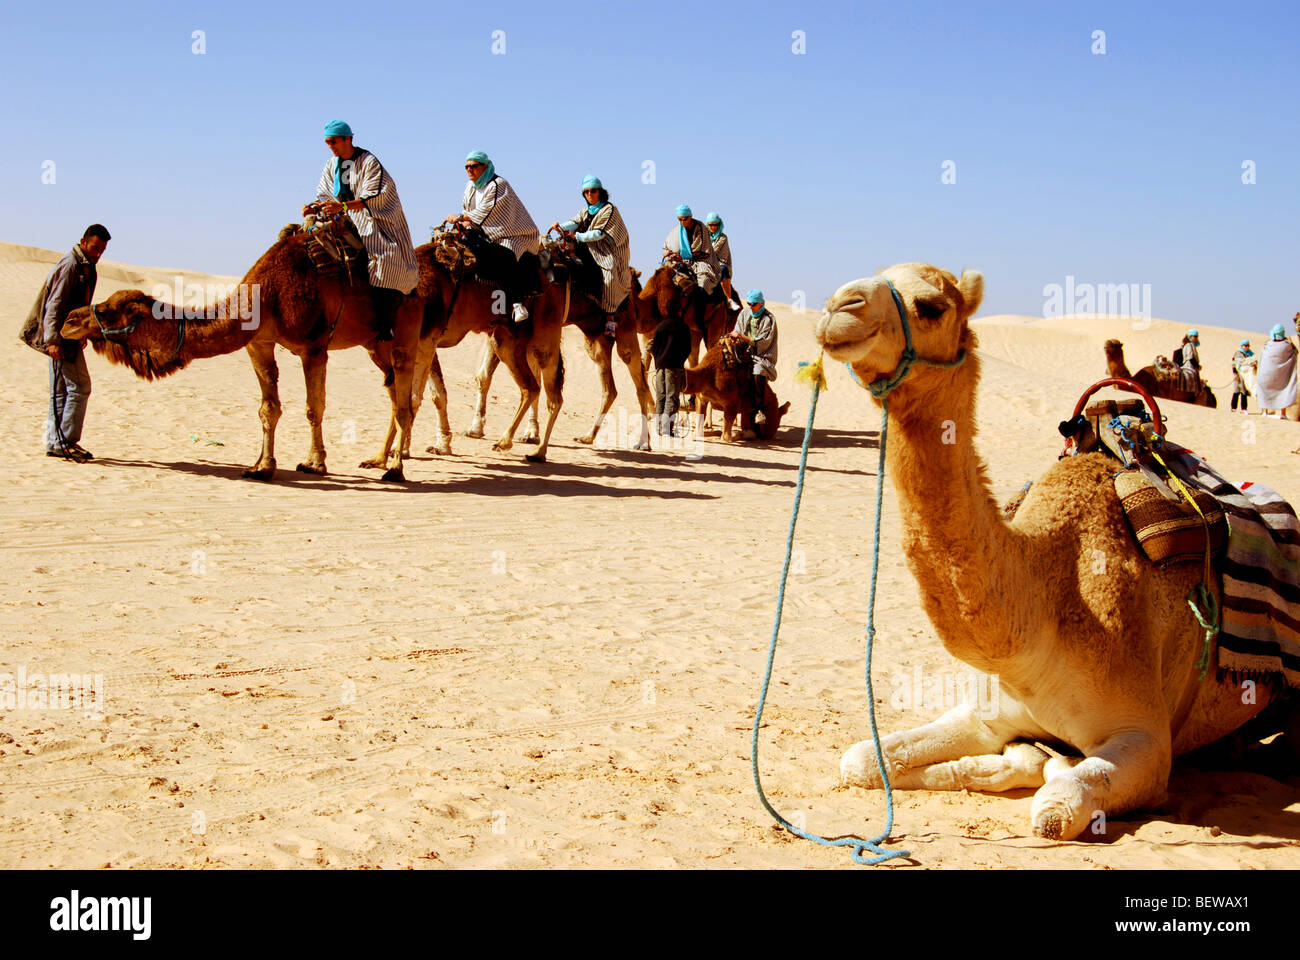 Group of cameleers in the desert of Tunisia near to the oasis town of Douz Stock Photo